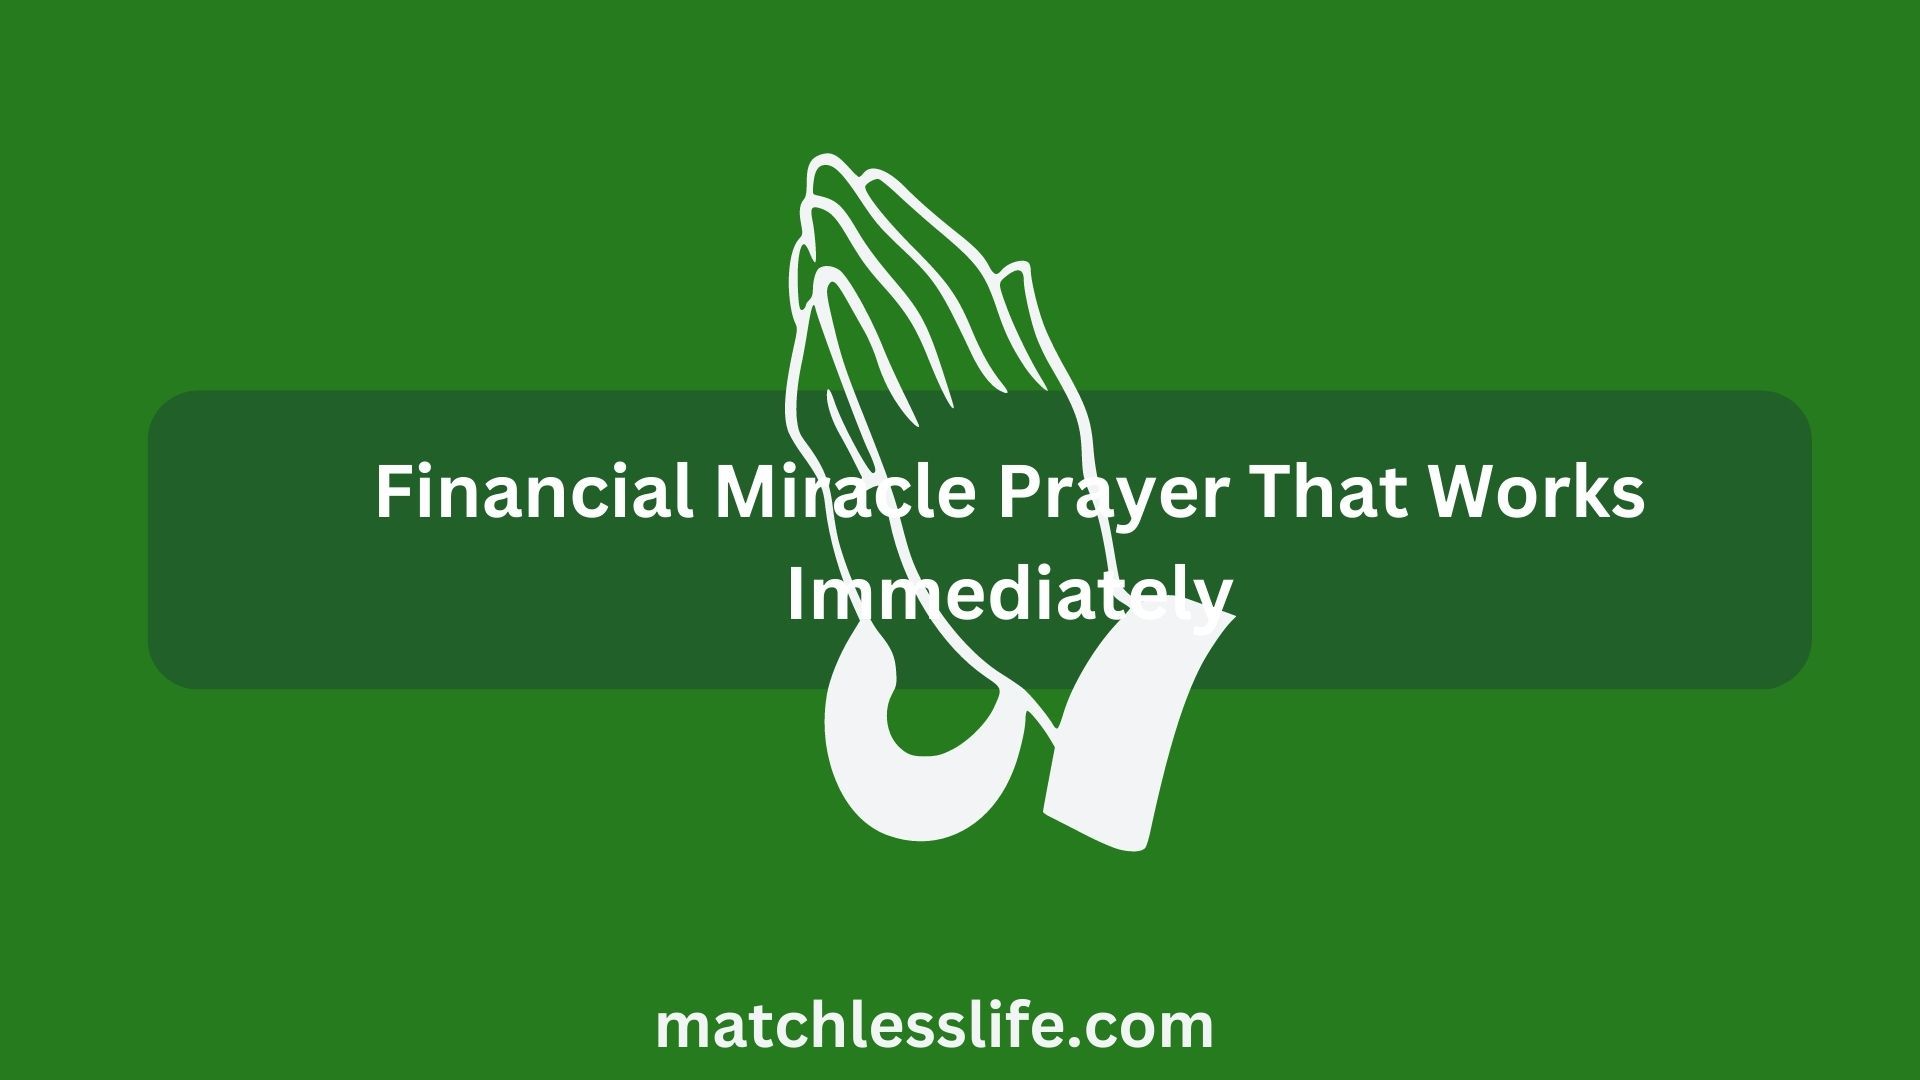 Financial Miracle Prayer That Works Immediately